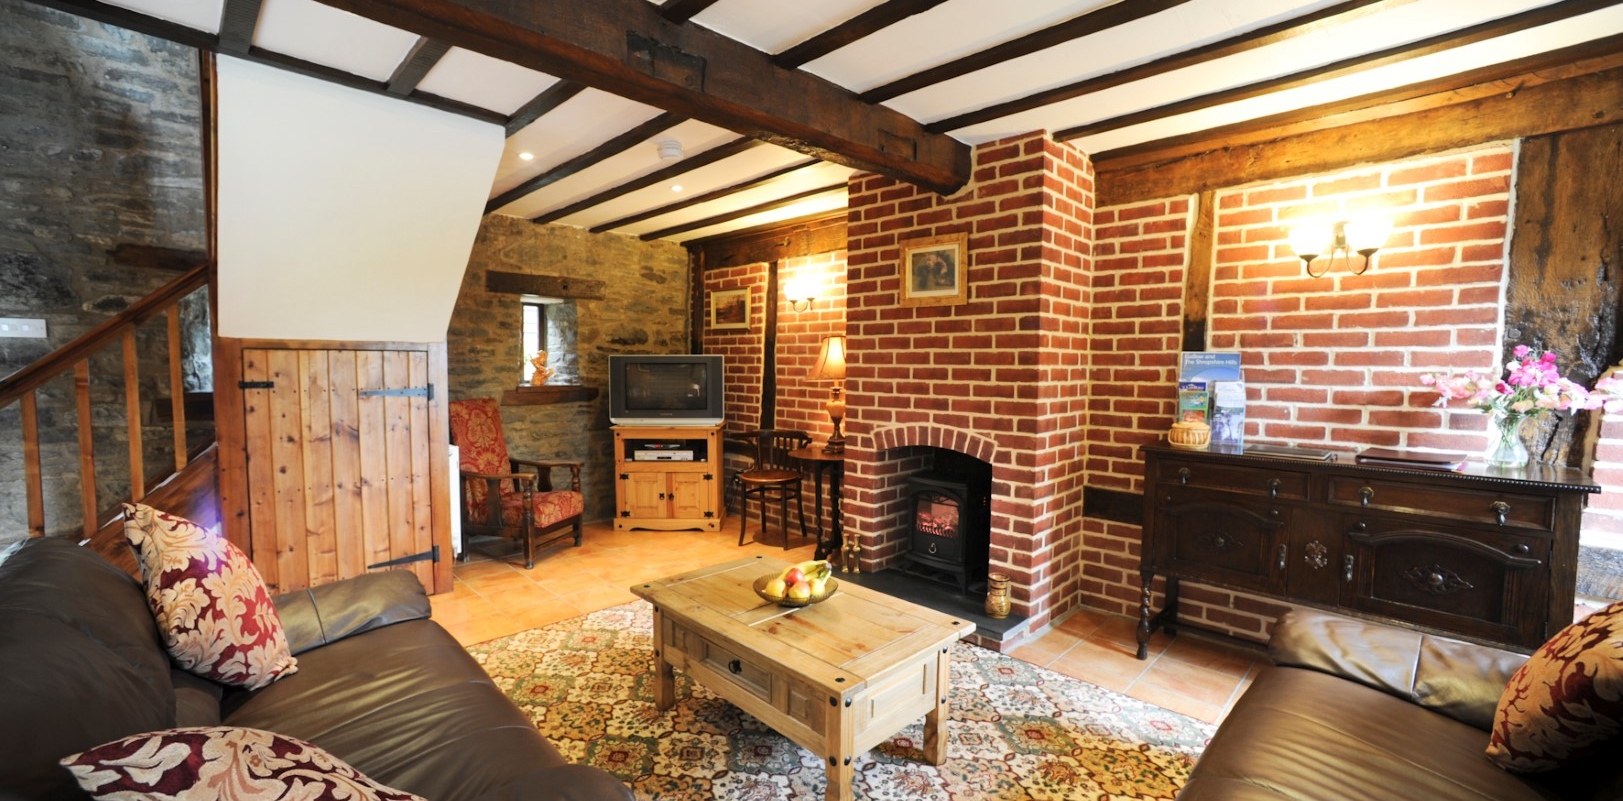 Self Catering Accommodation in Shropshire